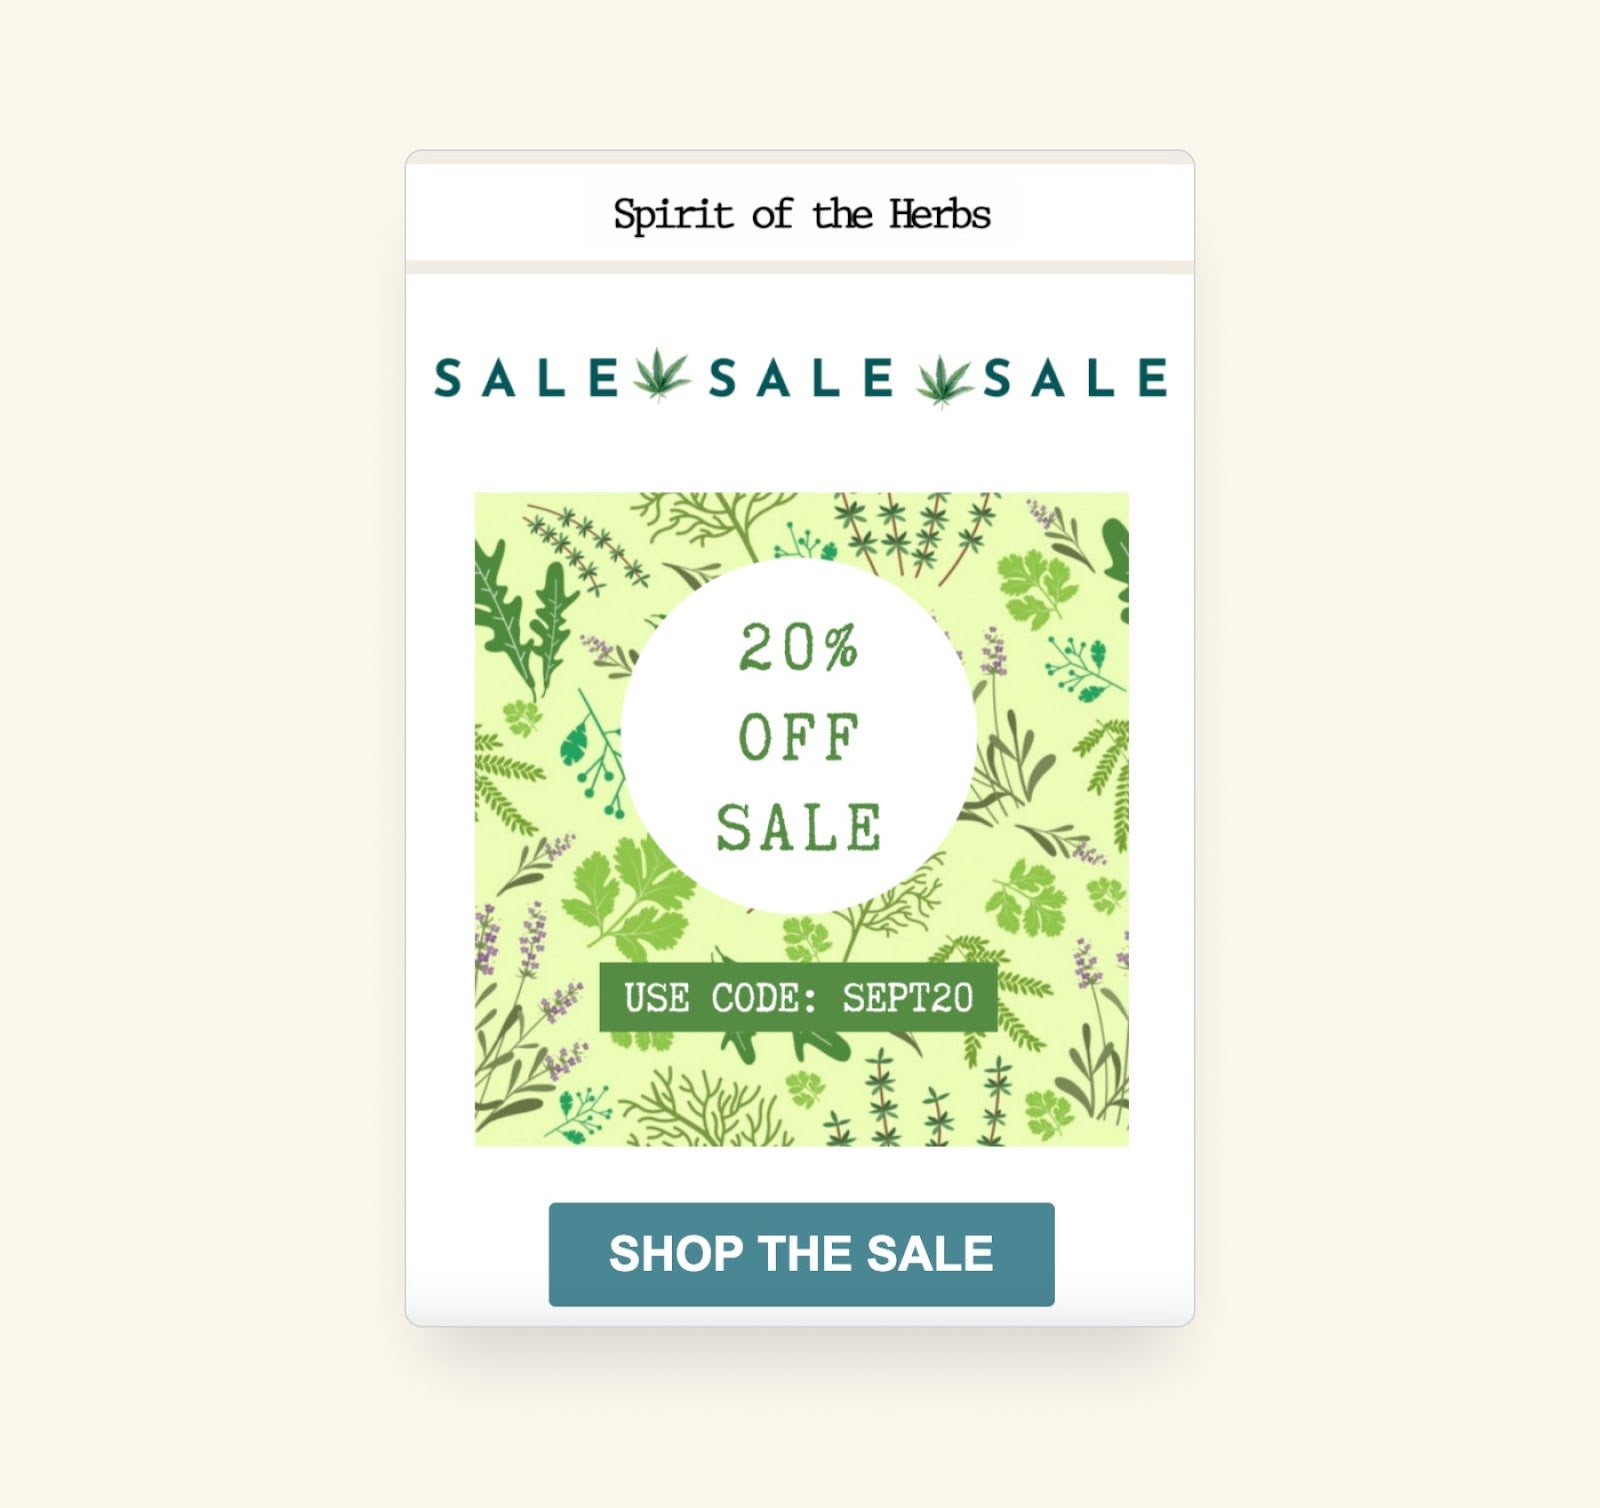 Email from Spirit of the Herbs that announces a 20% off sale with a discount code.